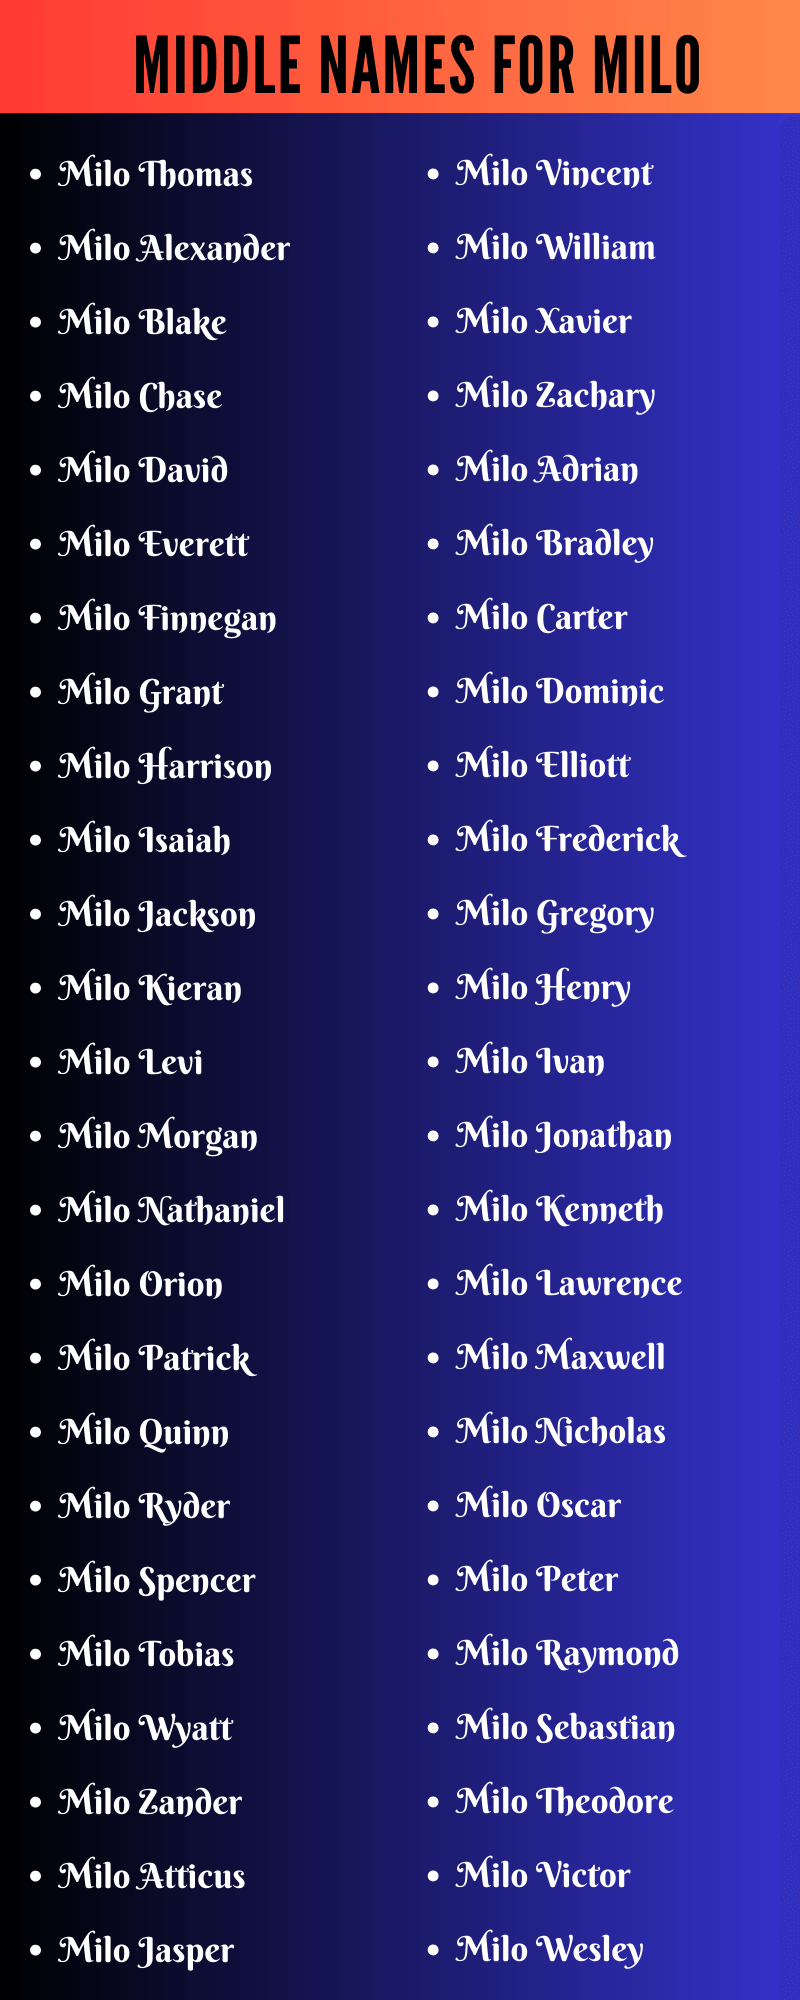 Middle Names For Milo